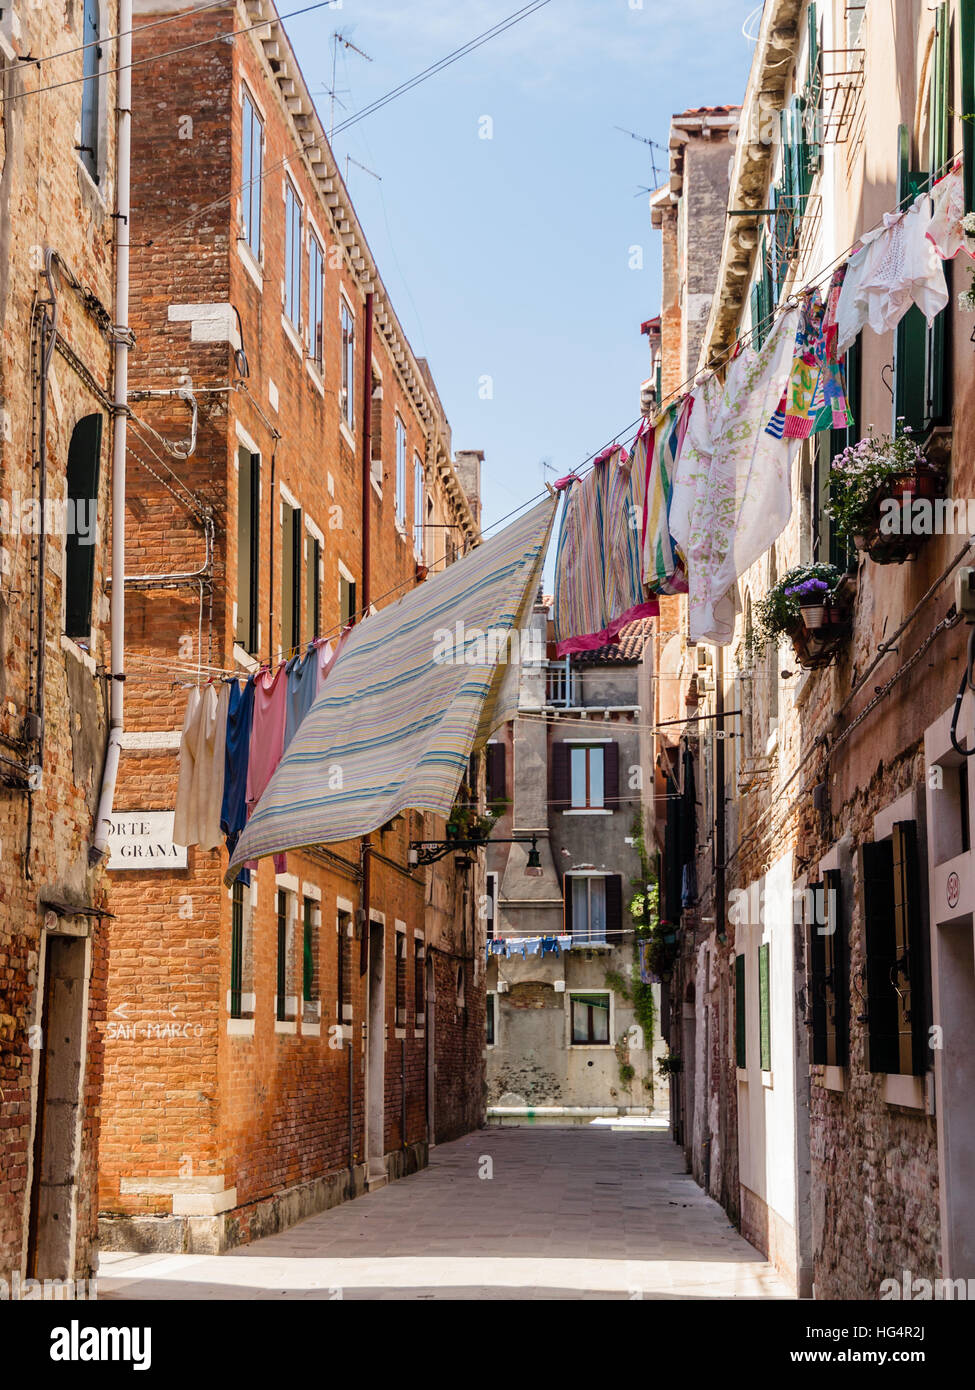 Typical street scene in Venice, Italy, with washing hanging between the town houses. Stock Photo